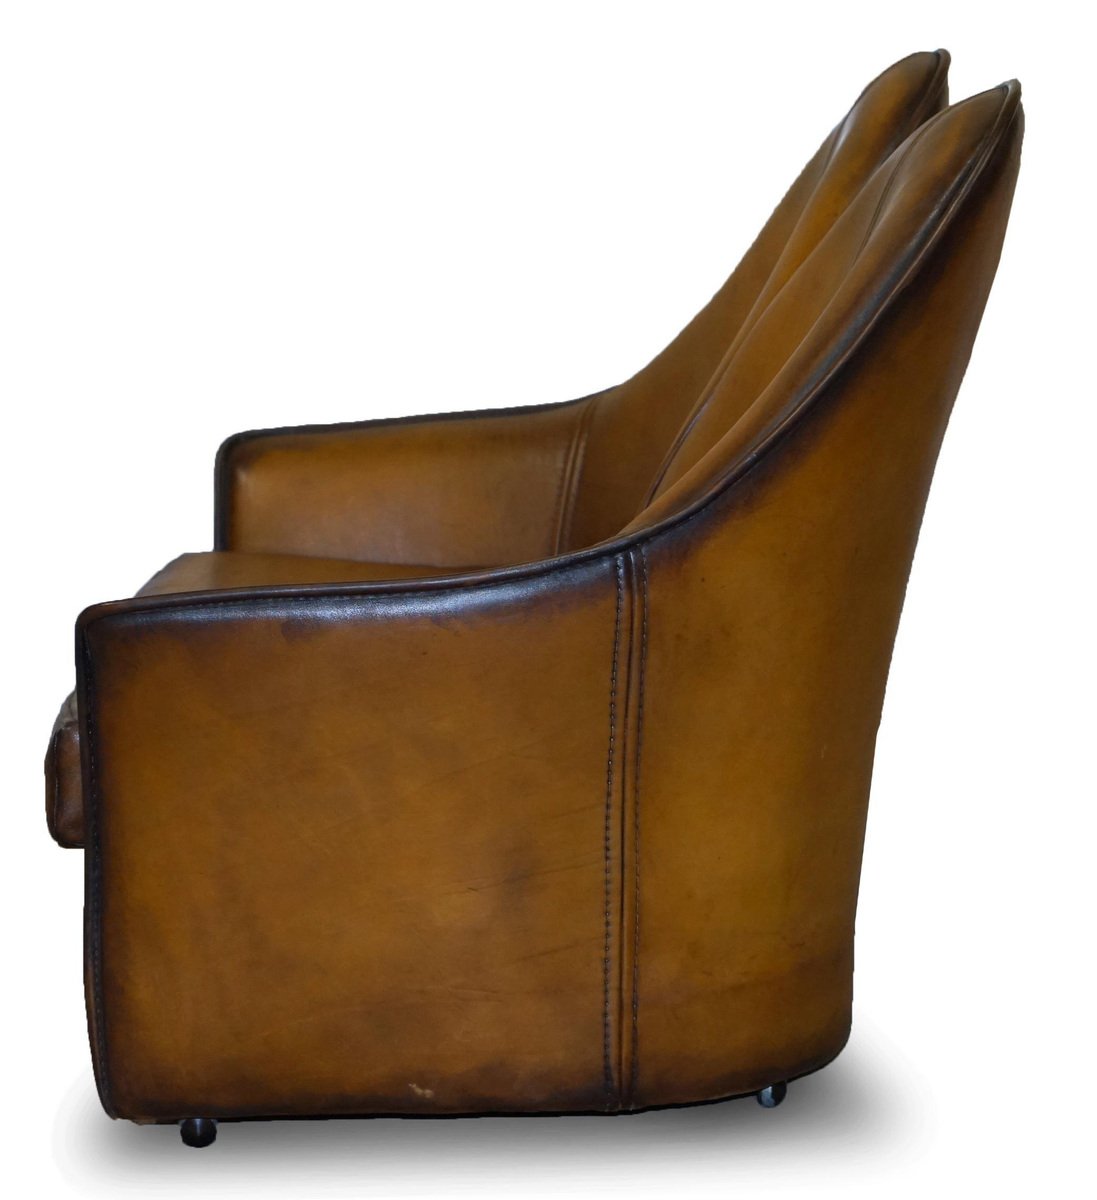 curved back brown leather sofa GZP-1006723